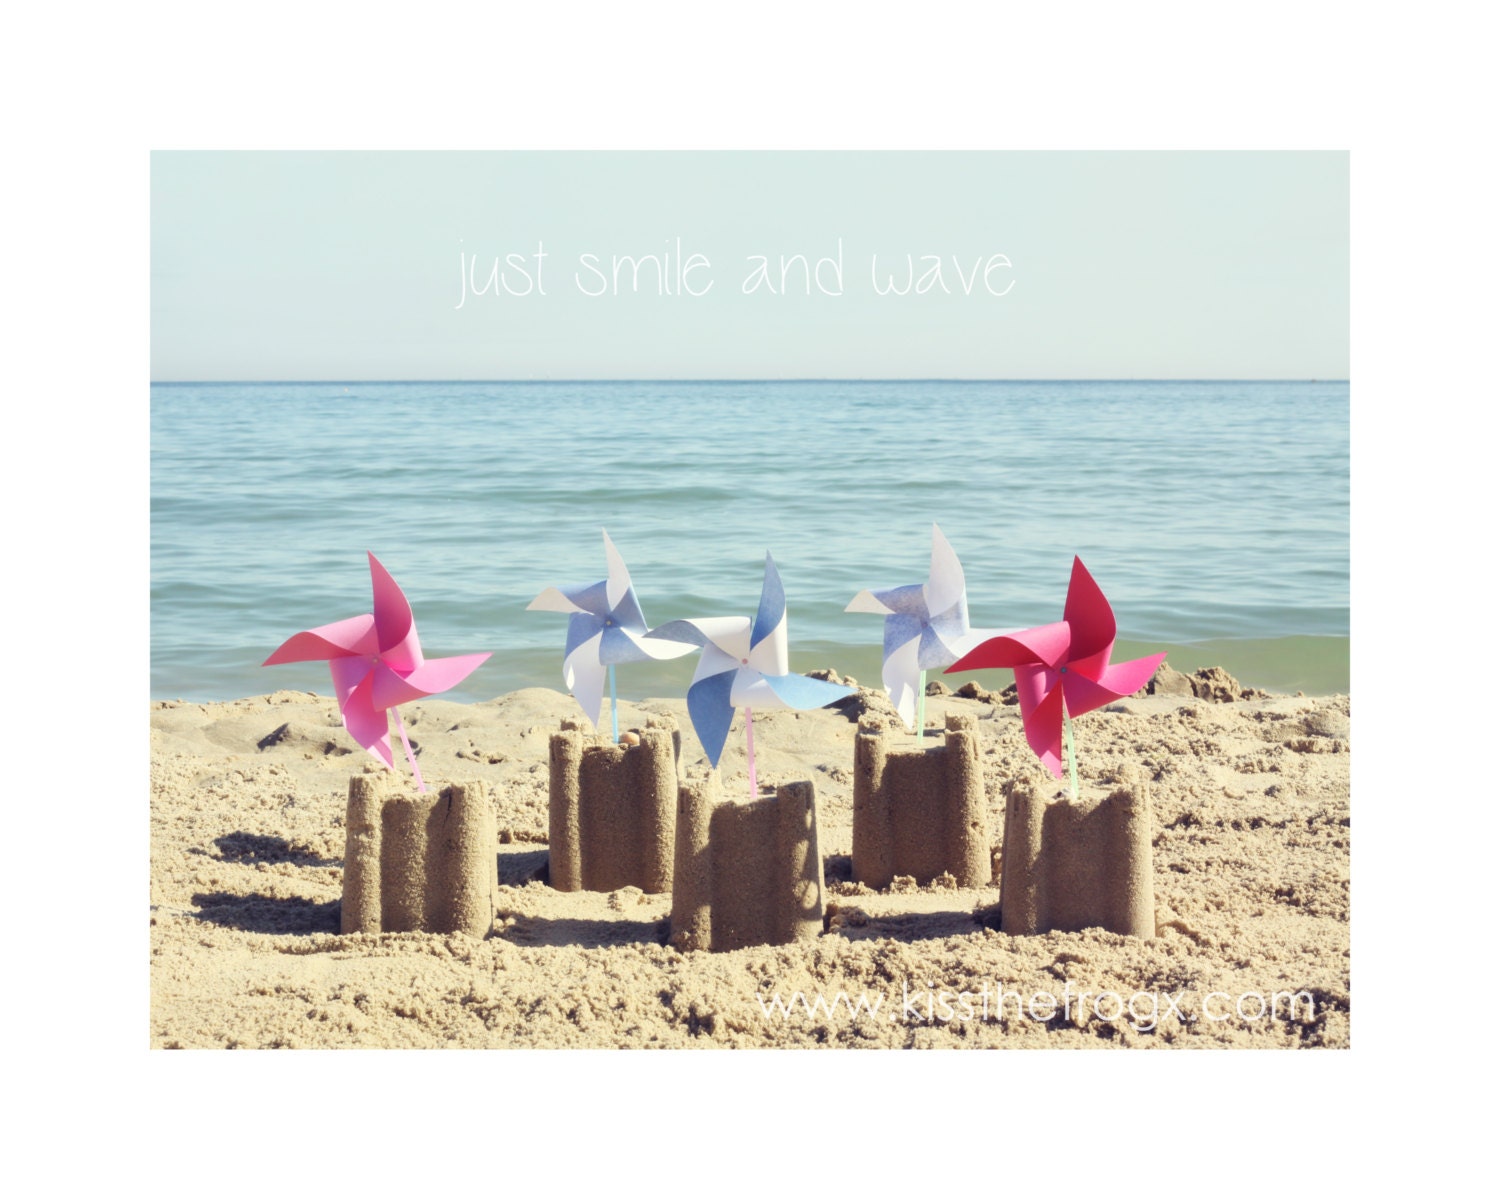 Just Smile and Wave 6x8" photo with sandcastles, paper windmills and inspirational typography - KisstheFrogx